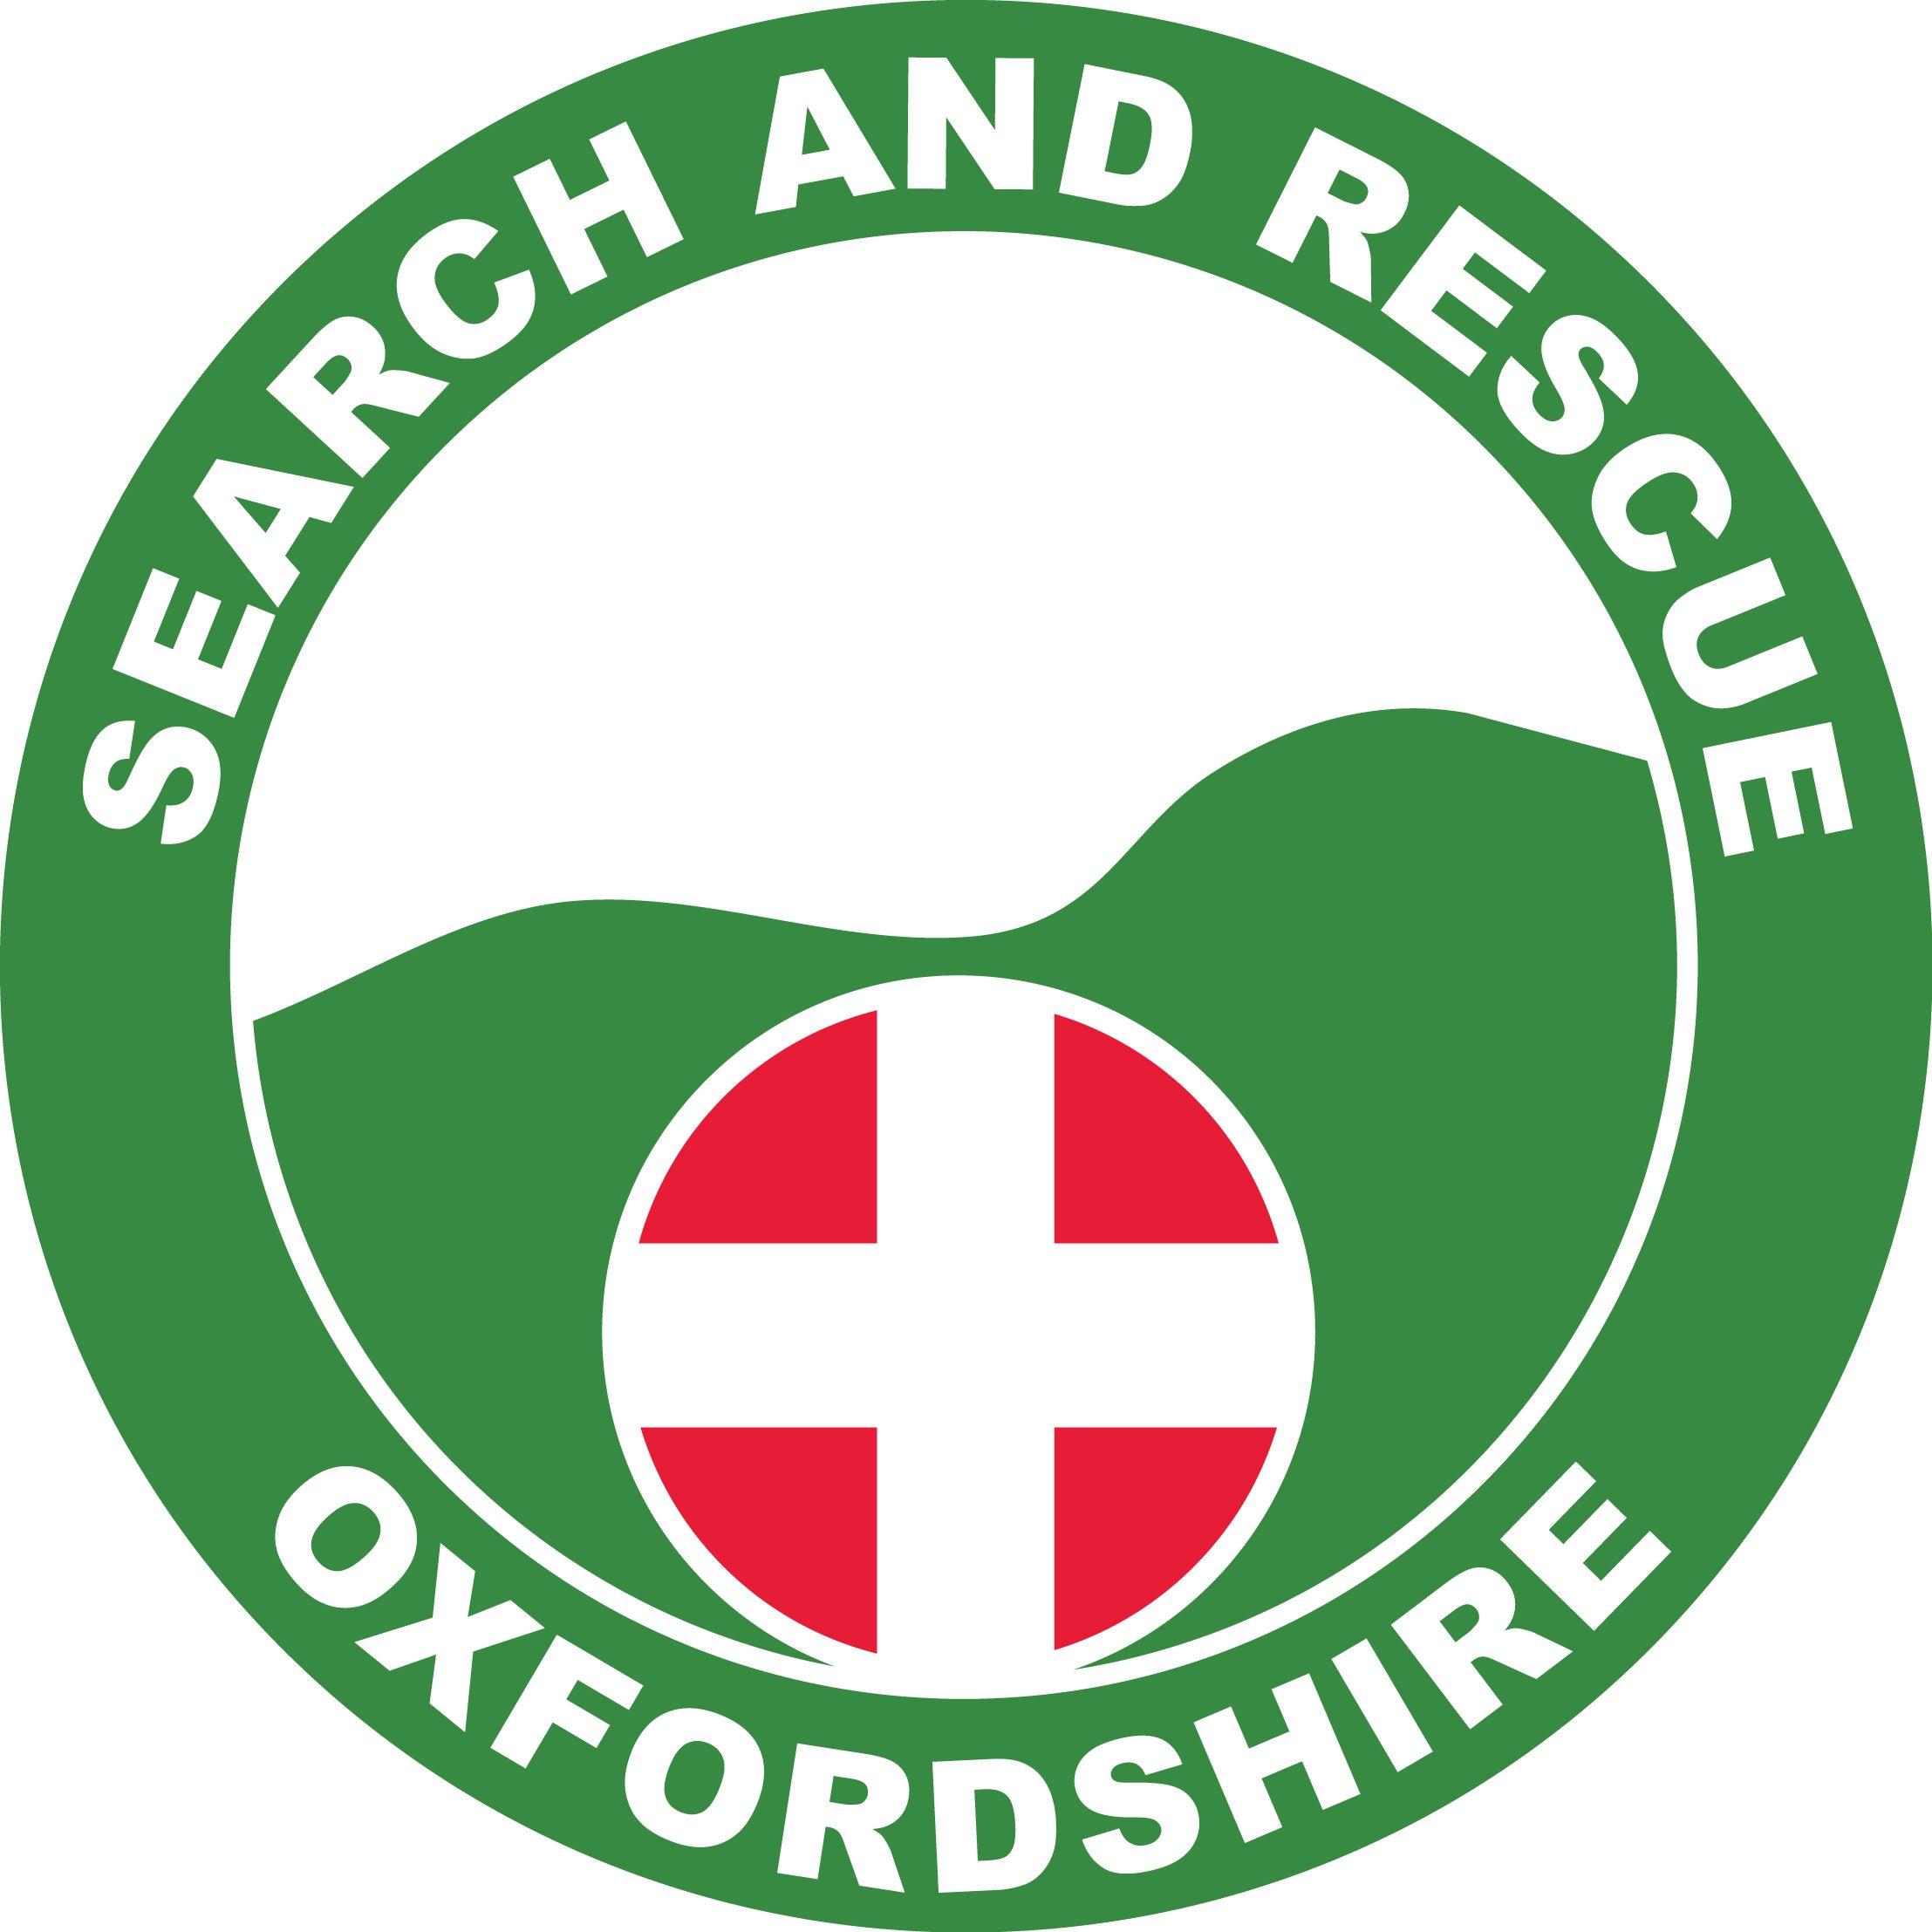 Search and Rescue Logo - Oxfordshire Lowland Search and Rescue: Helping vulnerable missing ...